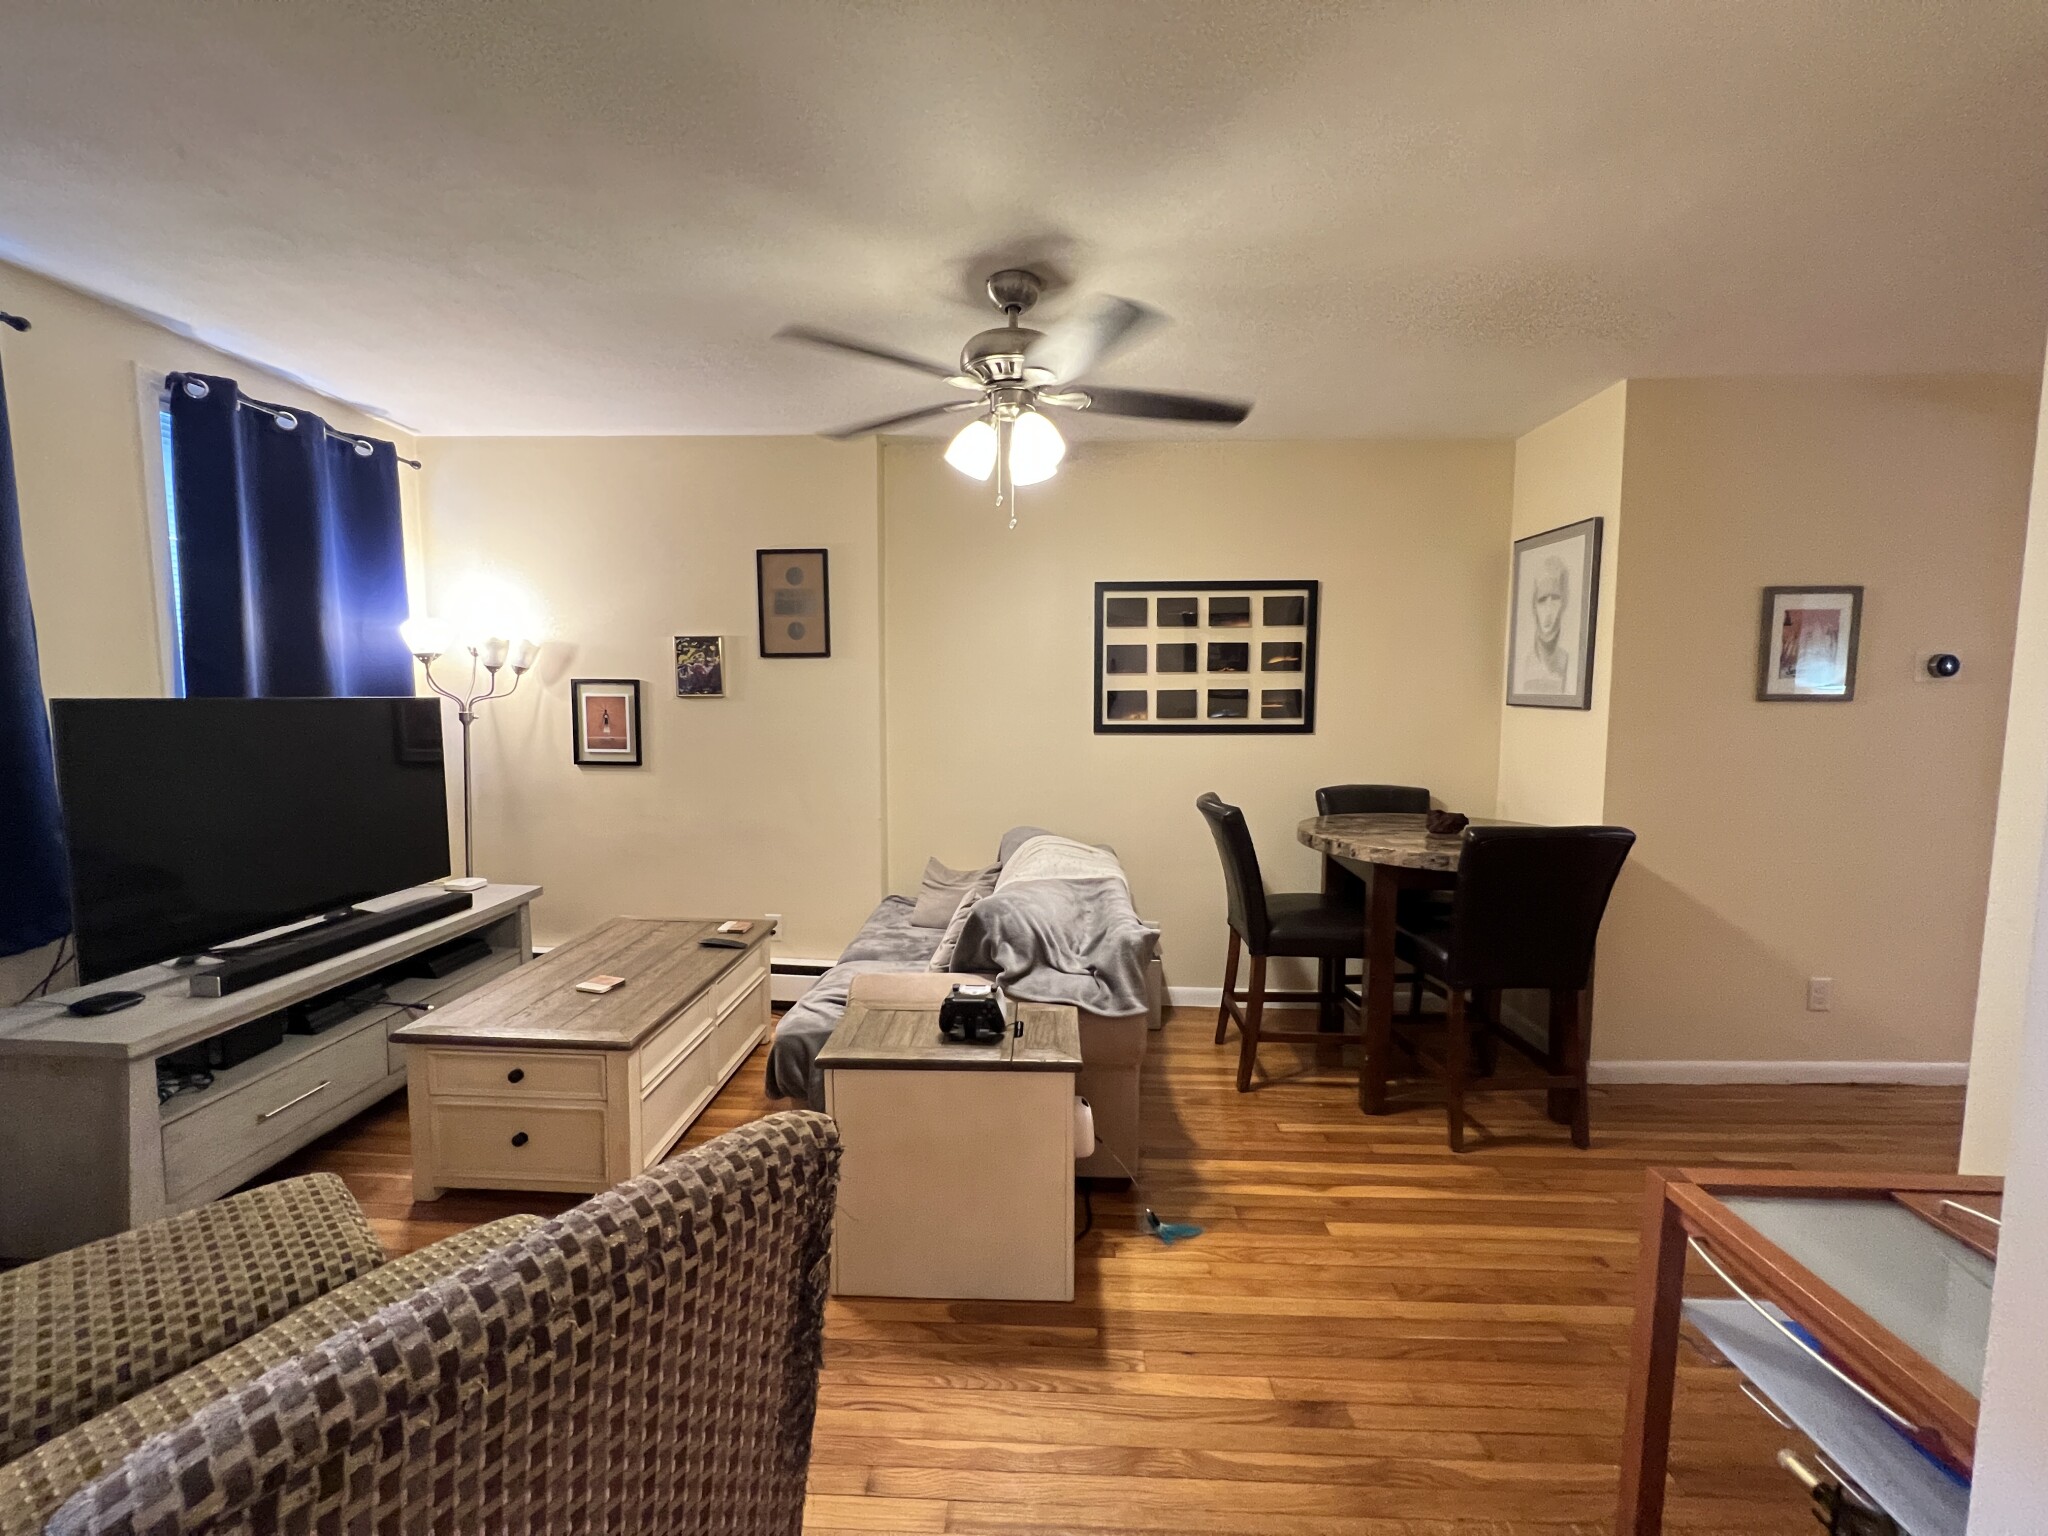 Photos of apartment on Trull,Somerville MA 02145